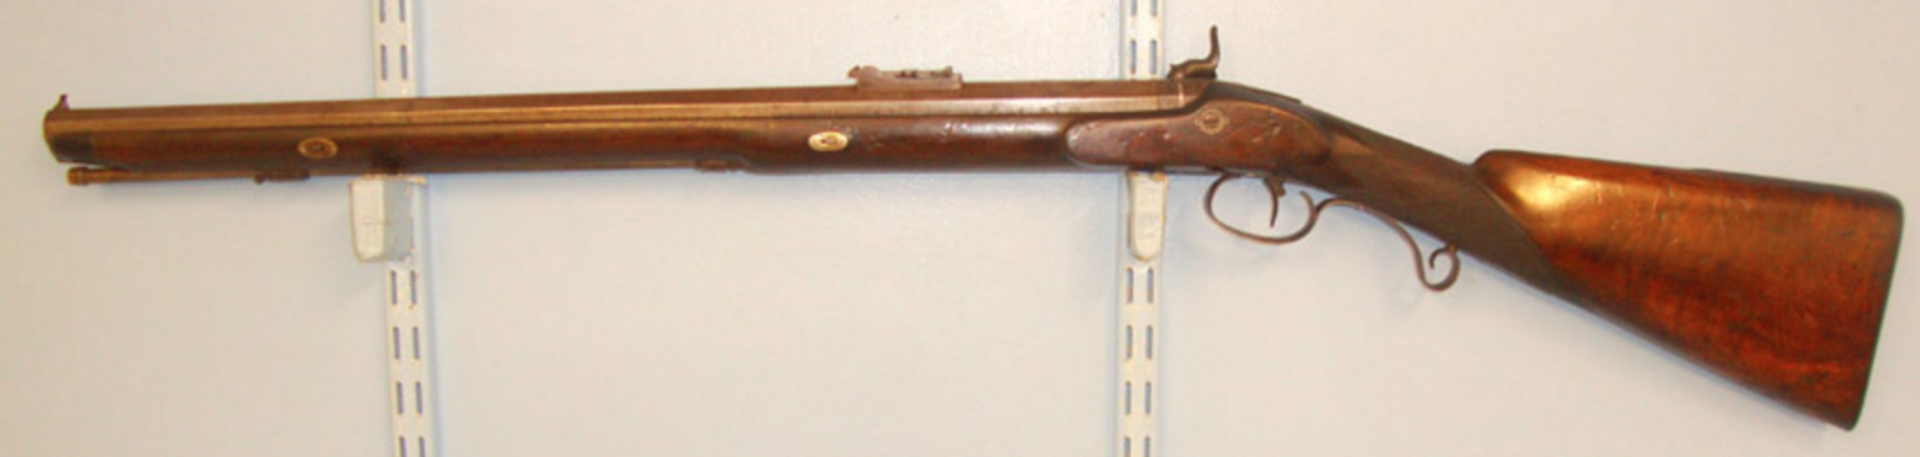 QUALITY, C1860 Victorian English .450 Calibre Muzzle Loading Percussion Hunting Rifle - Image 3 of 3